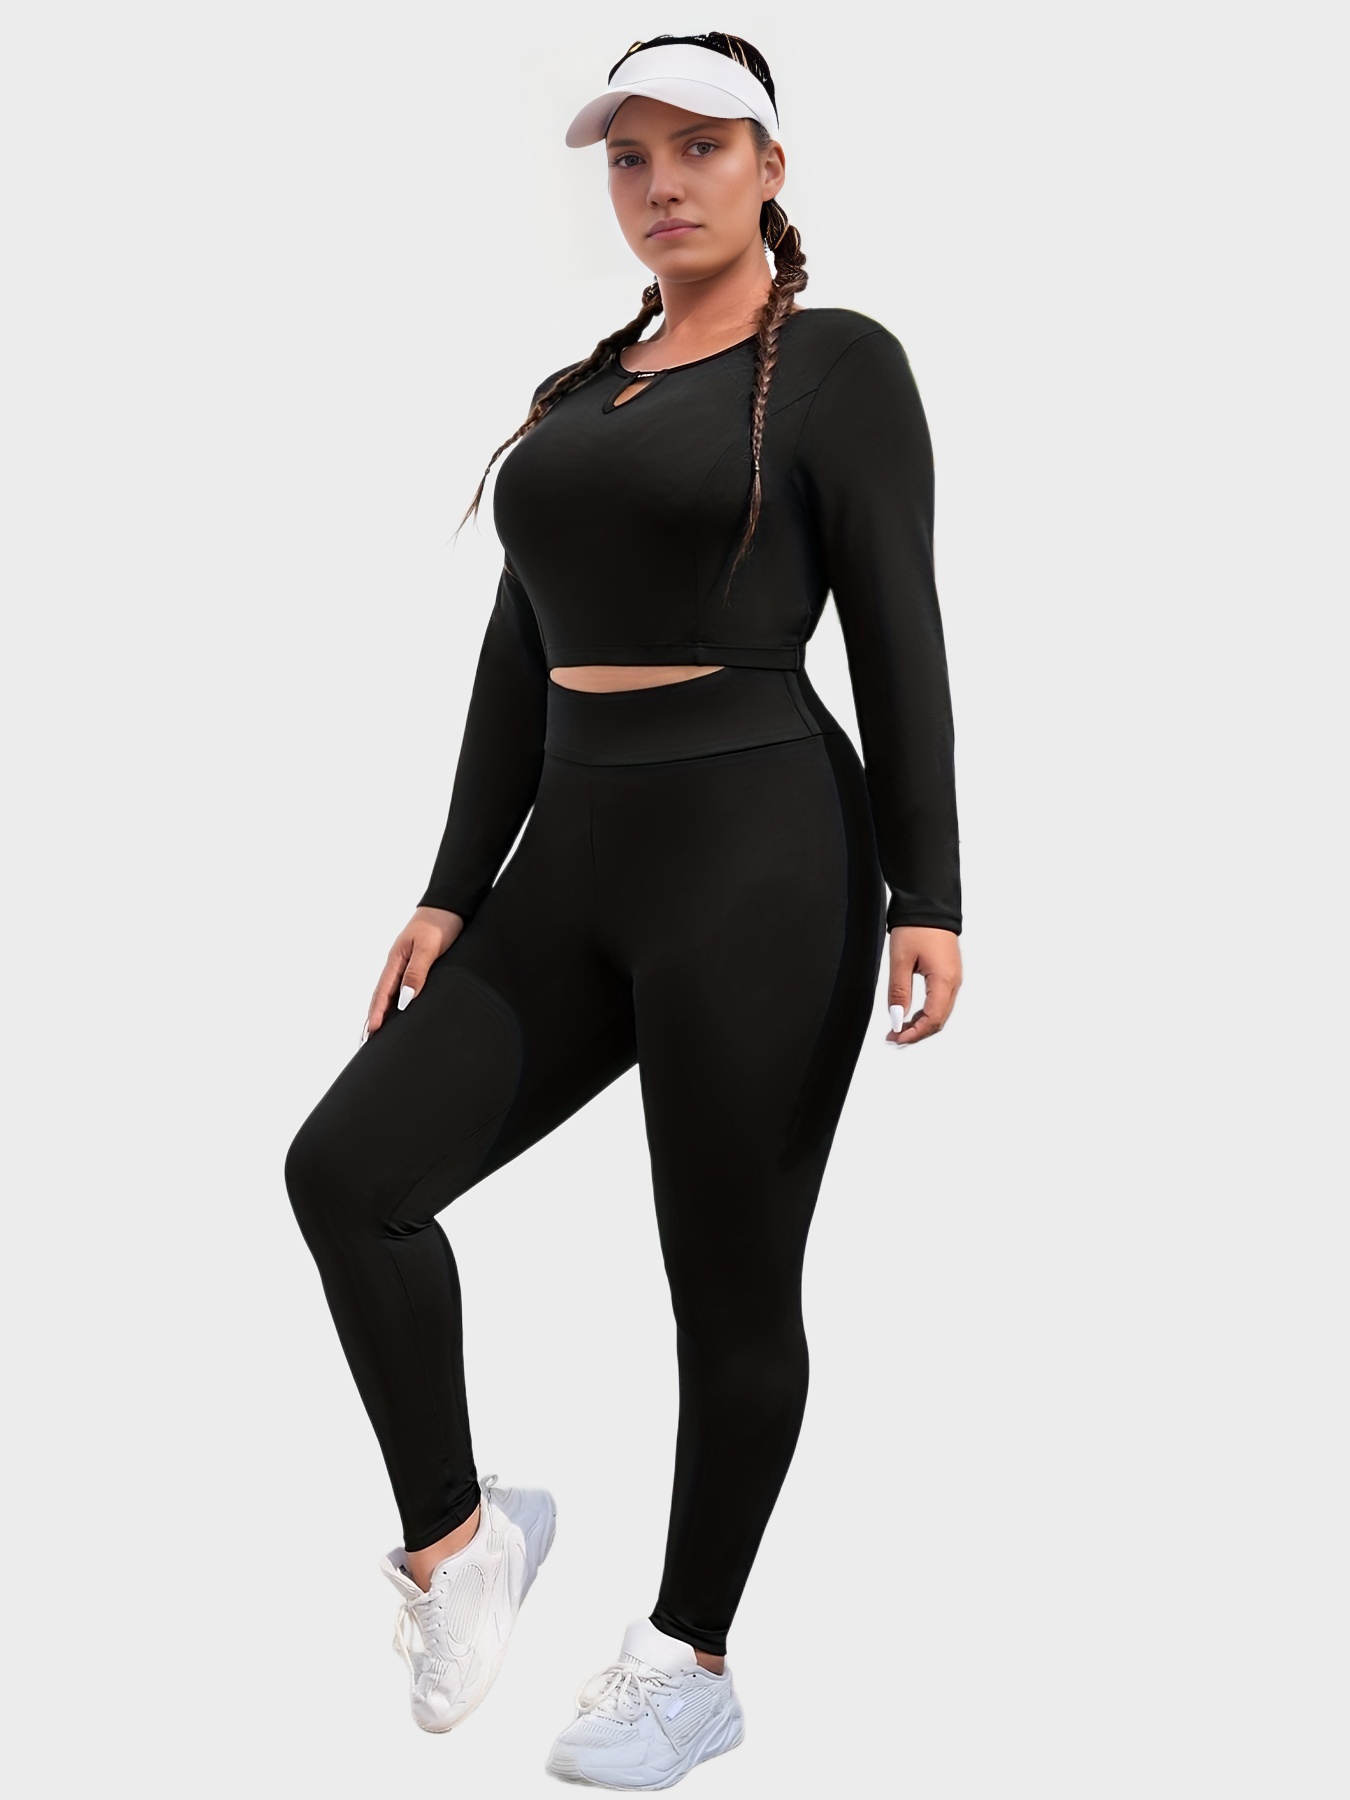 Plus Size Sports Outfits Two Piece Set, Women's Plus Cut Out Solid Long  Sleeve Round Neck High Stretch Top & Leggings Outfits 2 Piece Set